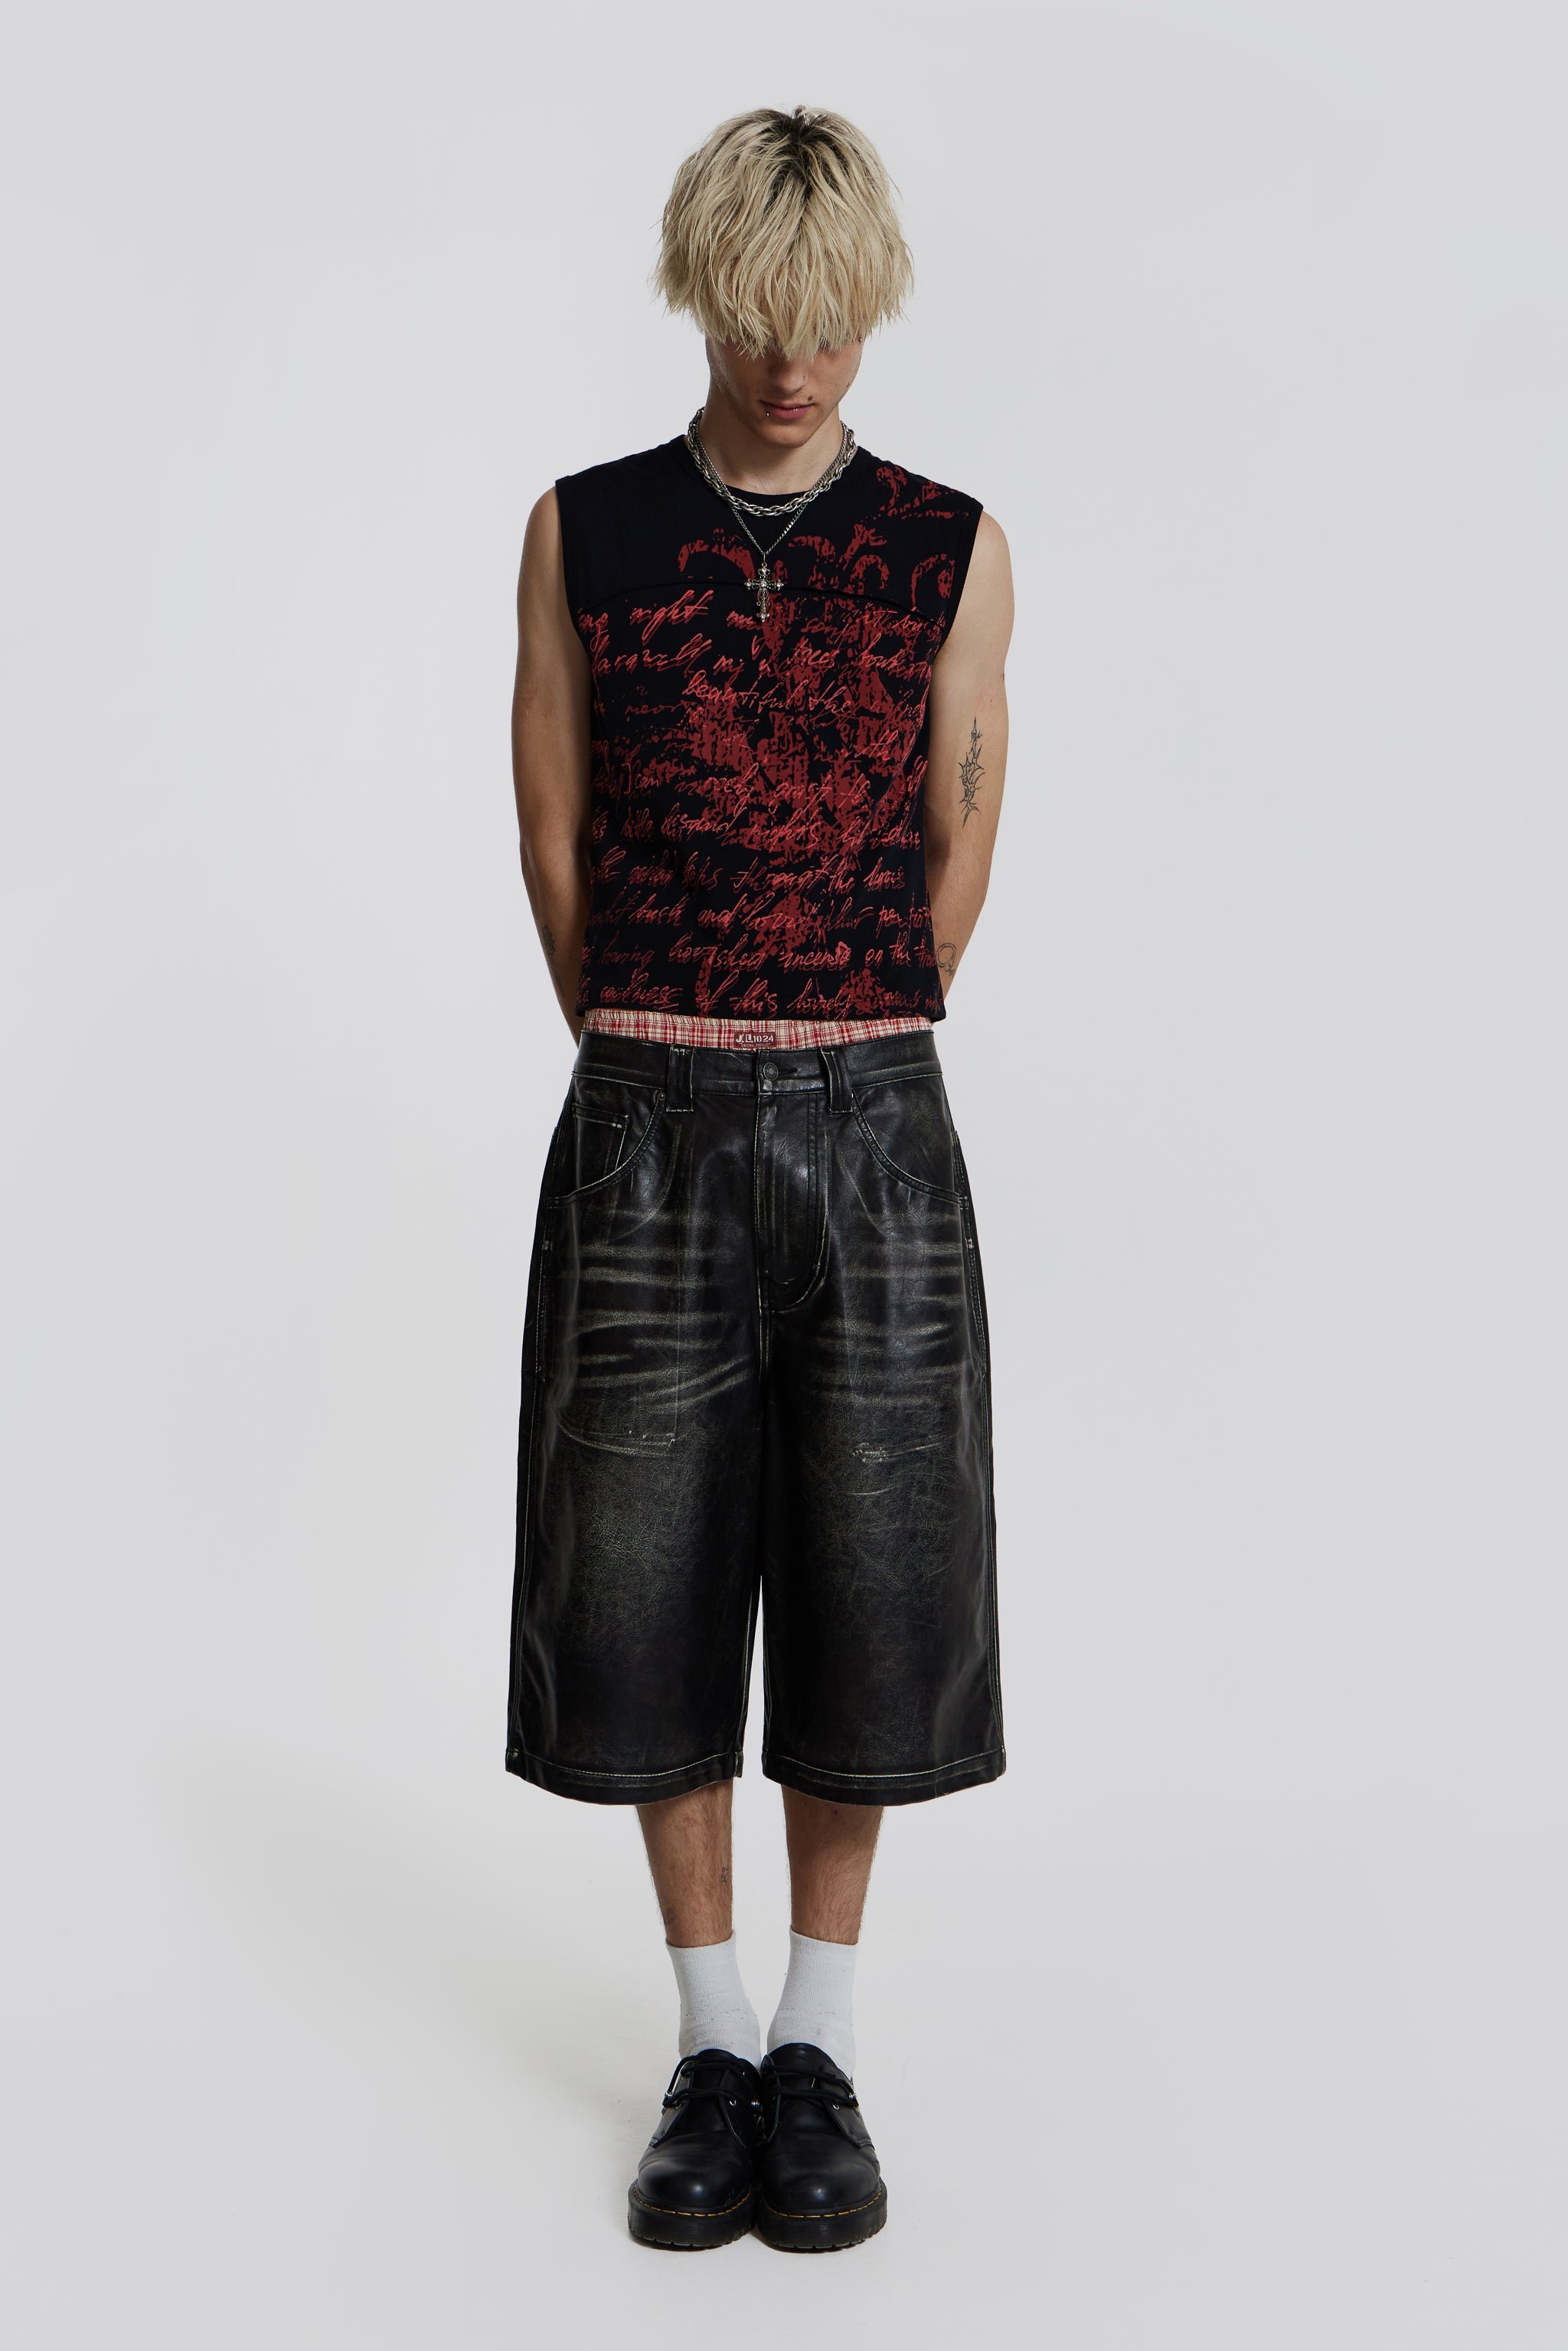 Jaded London Colossu Faux Leather Jorts in Black for Men